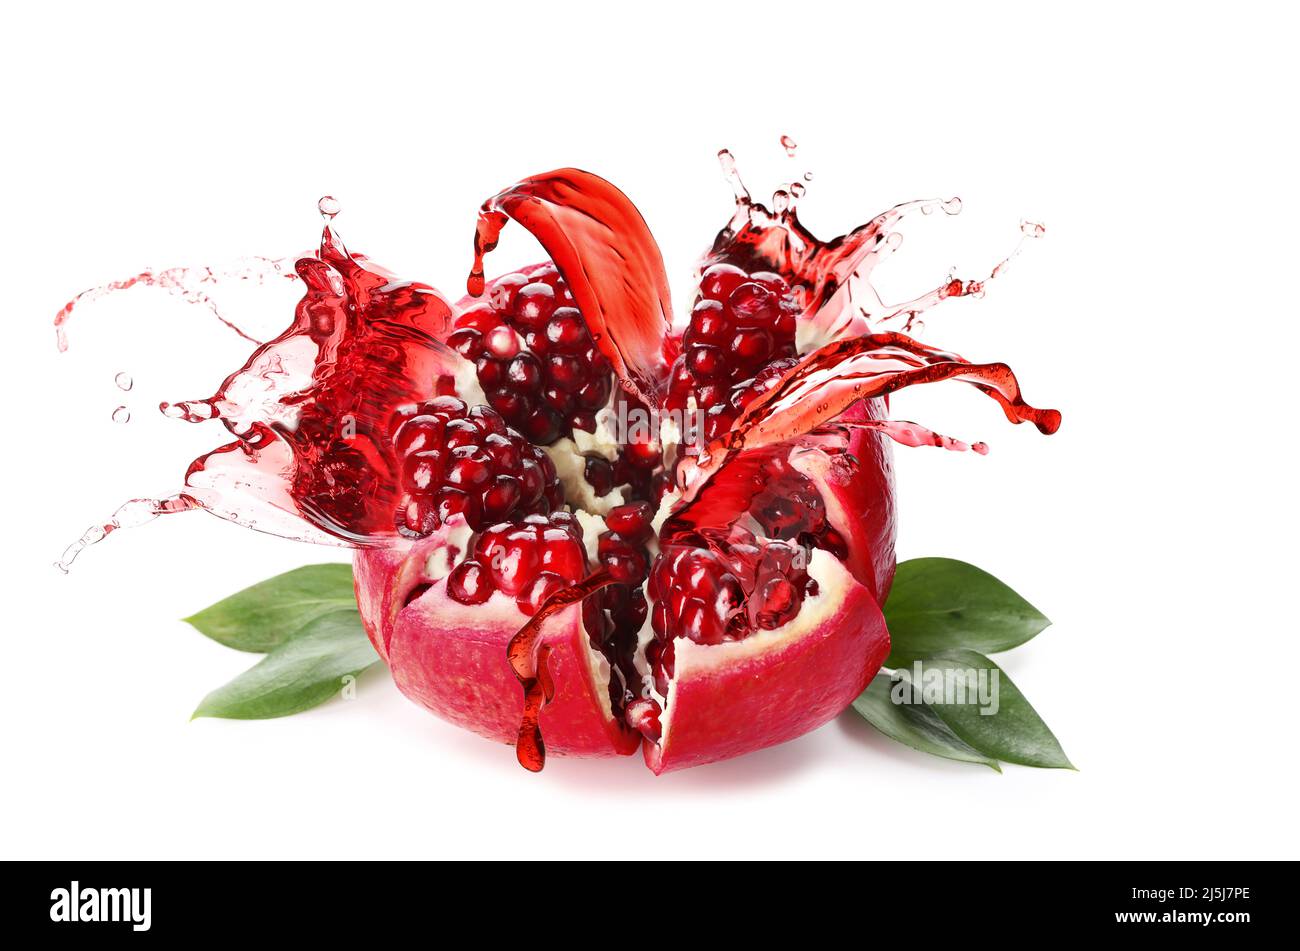 Can opener and pomegranate - open pomegranate for juice Stock Photo - Alamy